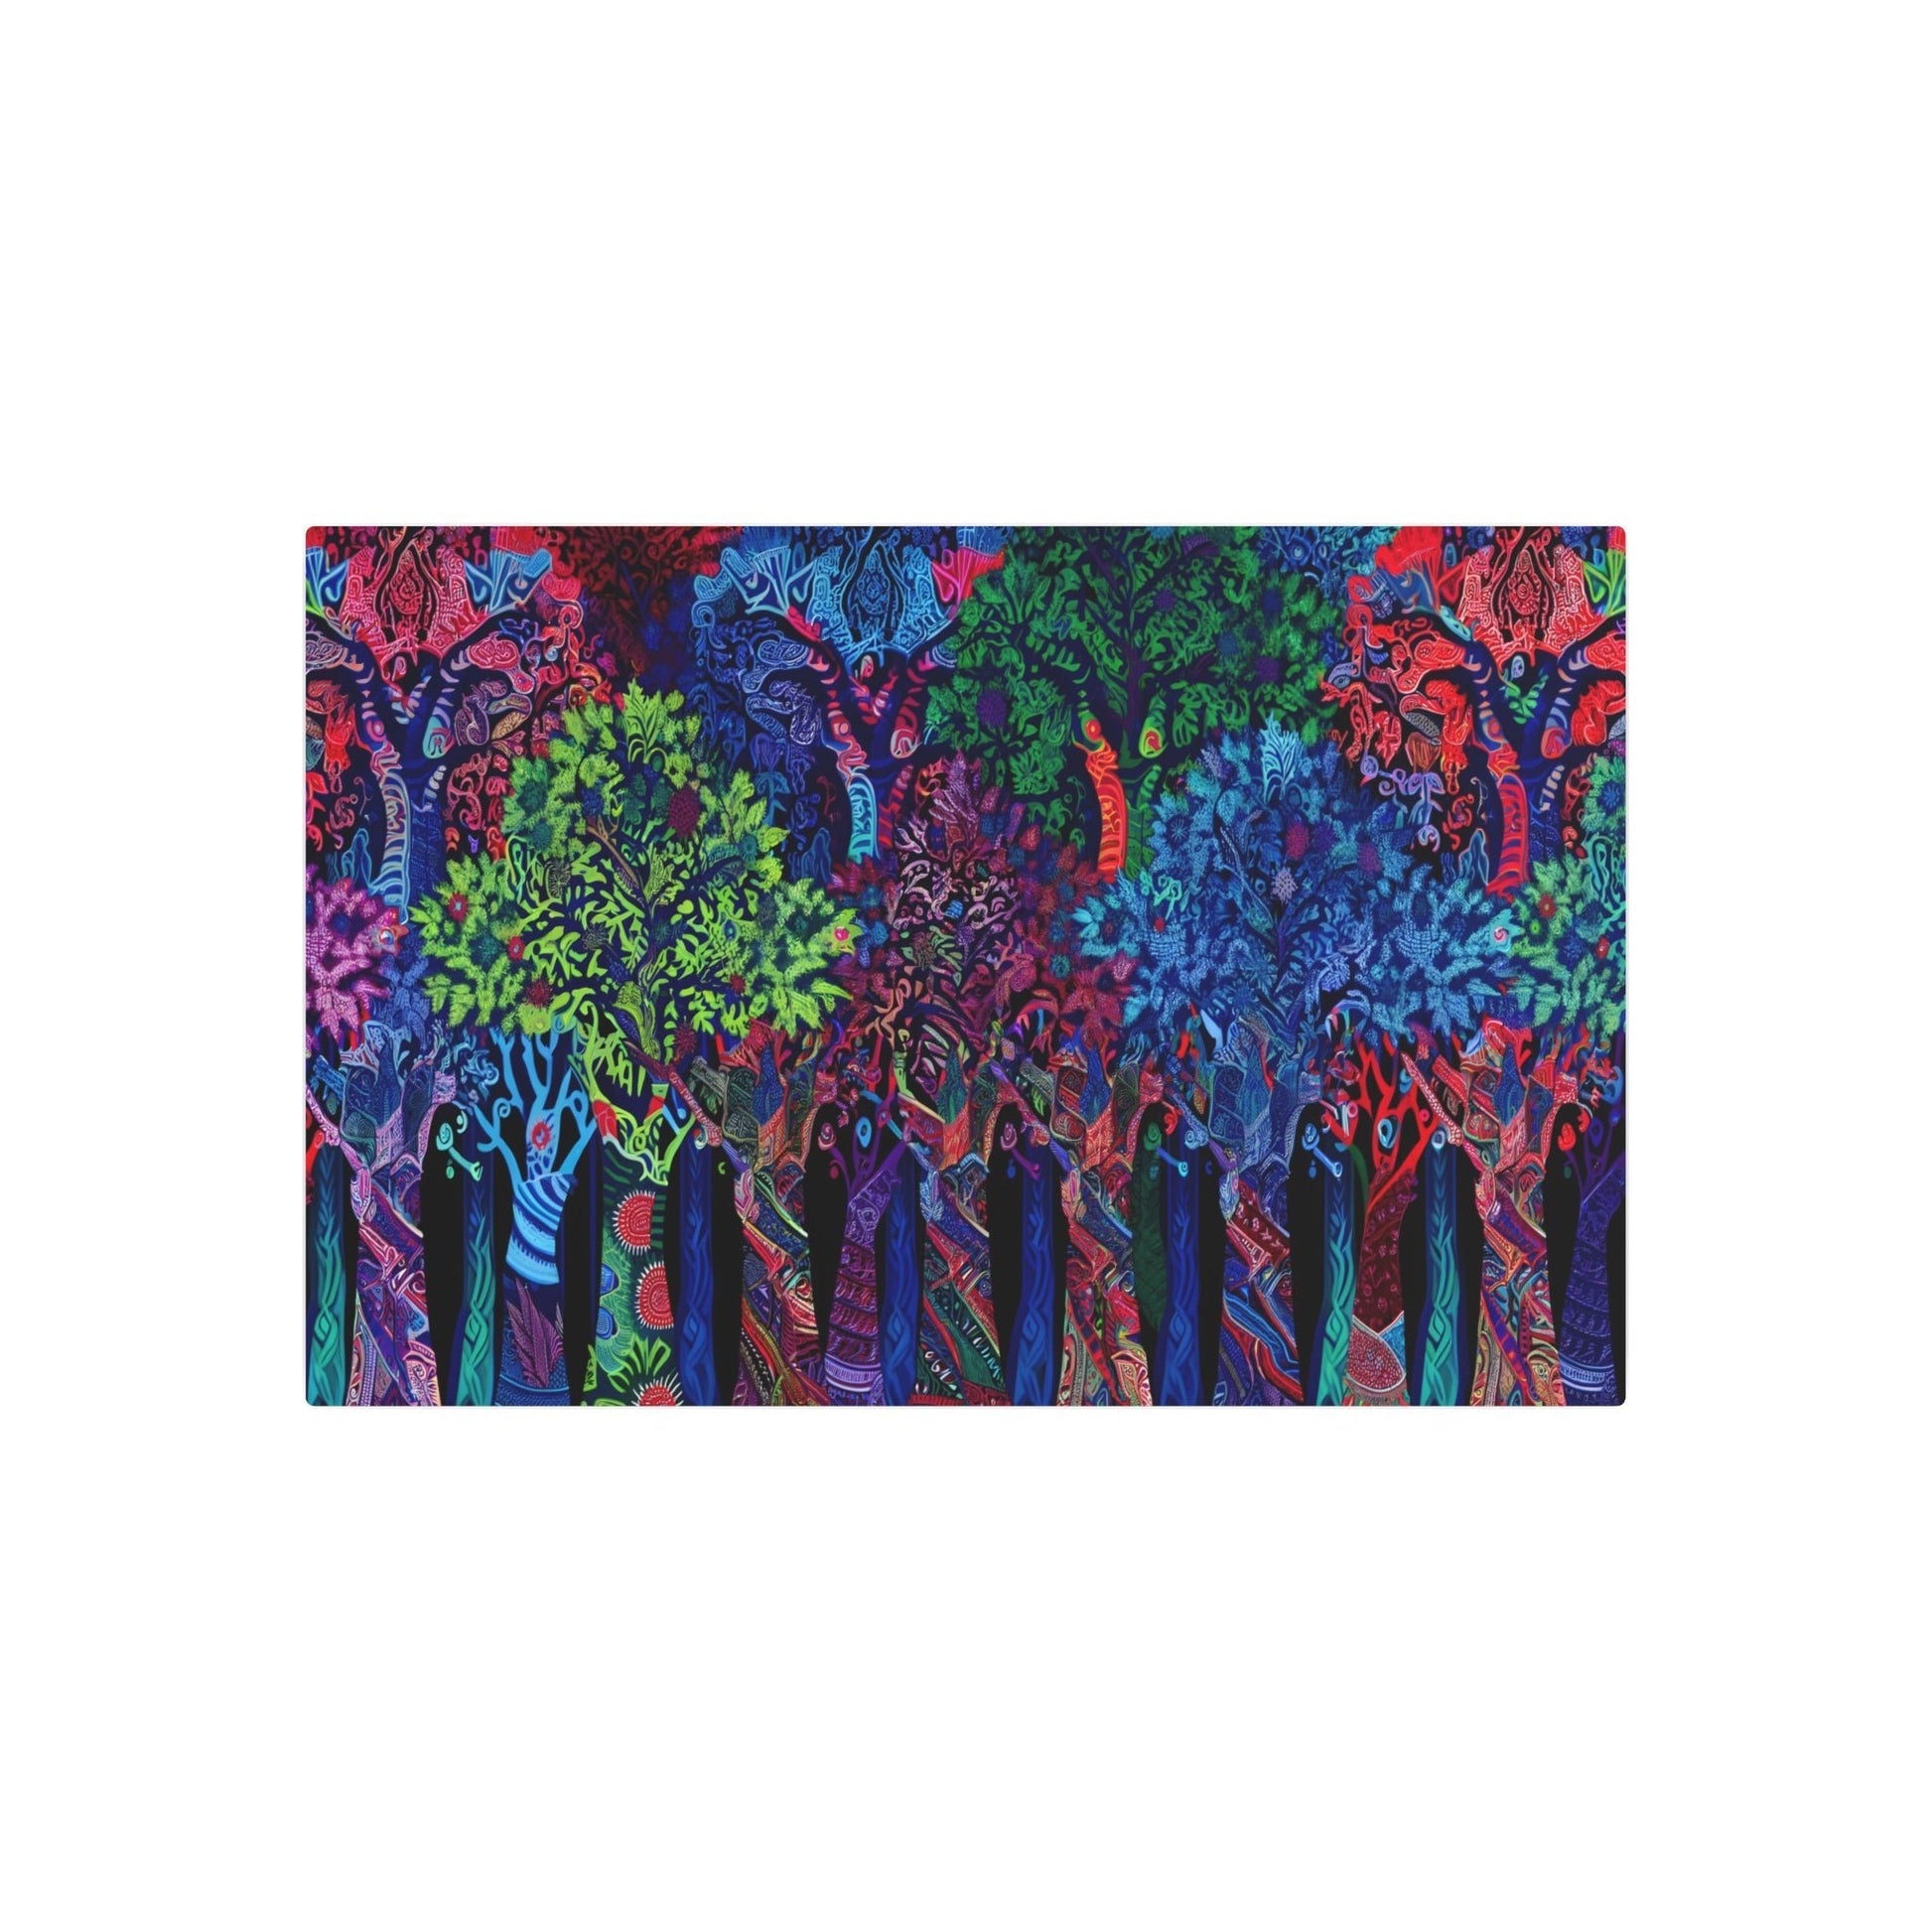 Metal Poster Art | "Indonesian Batik Art: Vibrant and Intricate Forest Scene with Detailed Patterned Trees - Authentic Non-Western Global Style Artwork" - Metal Poster Art 36″ x 24″ (Horizontal) 0.12''